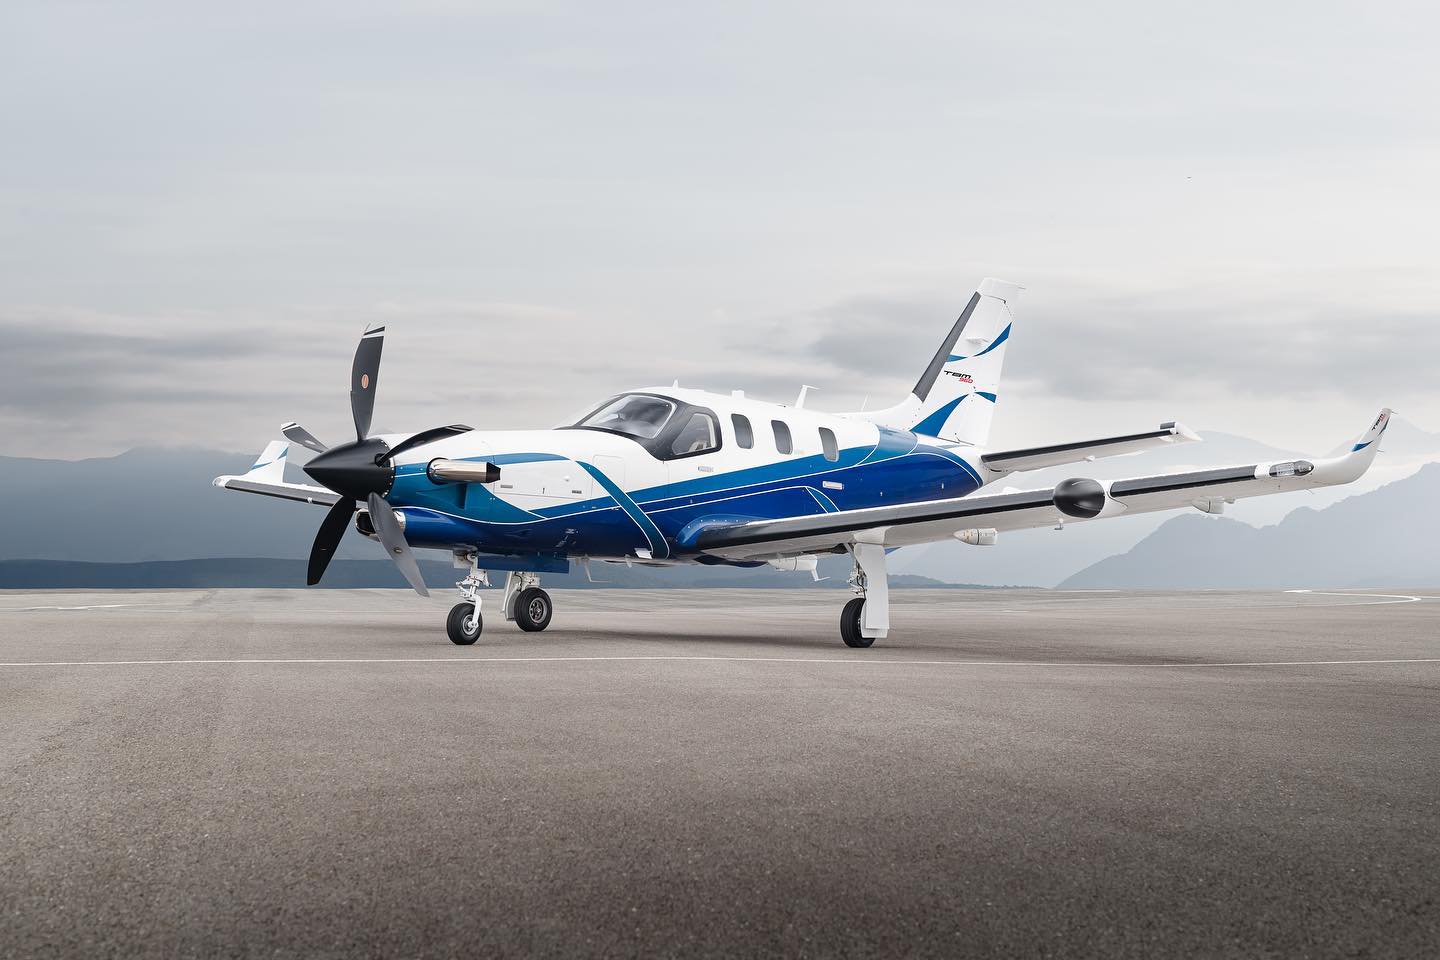 Daher’s top-of-the-line TBM 960 turboprop-powered aircraft makes its European event premiere at AERO Friedrichshafen